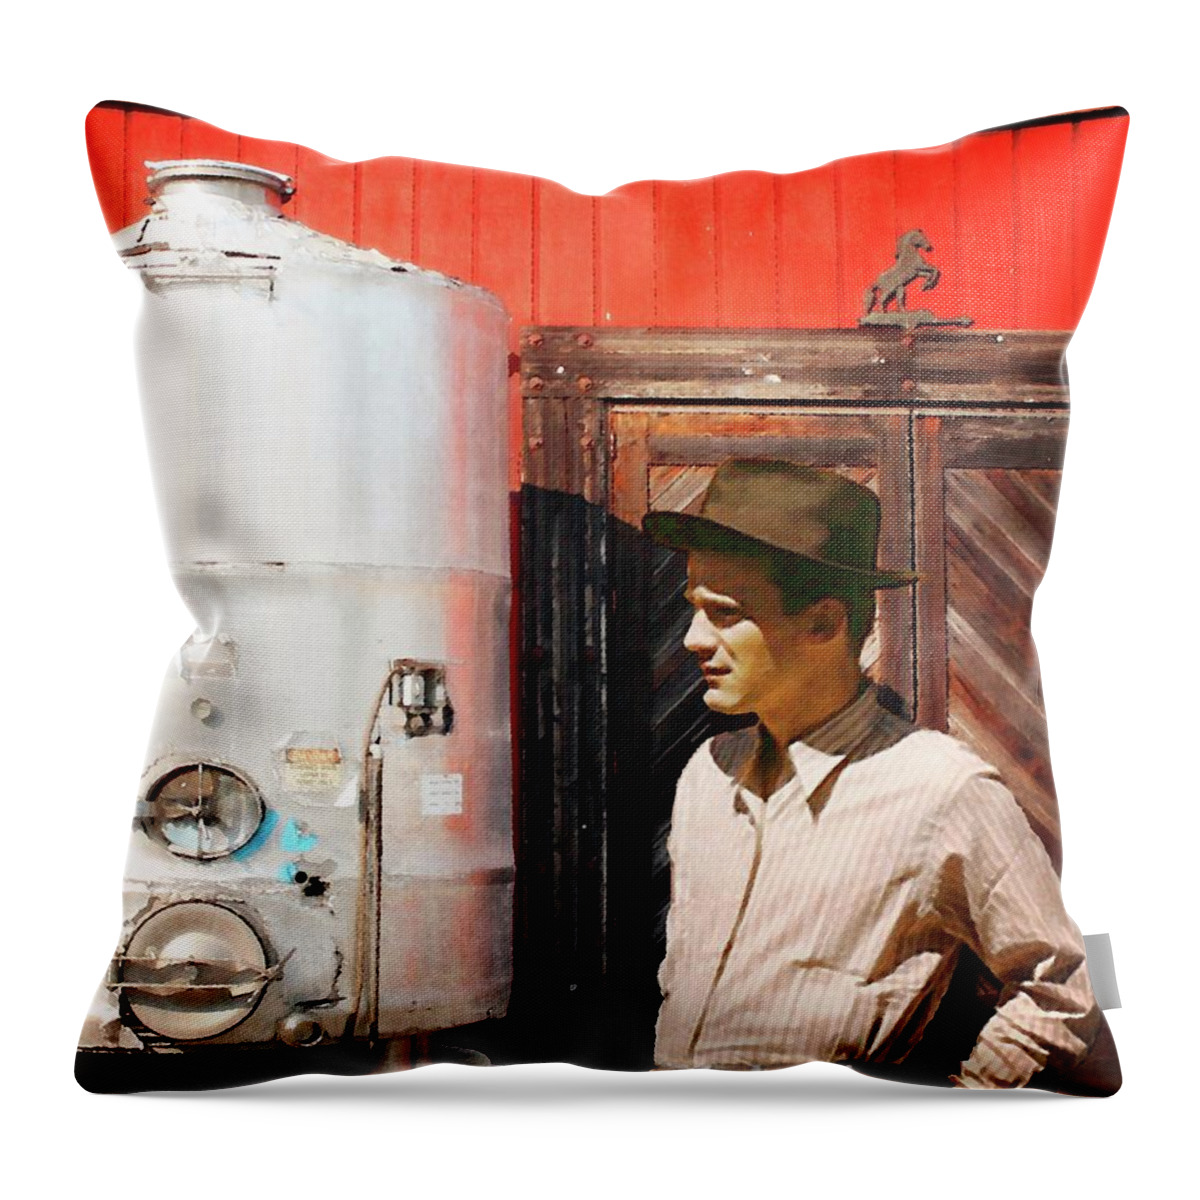 Winery Throw Pillow featuring the photograph Winery Worker by Timothy Bulone